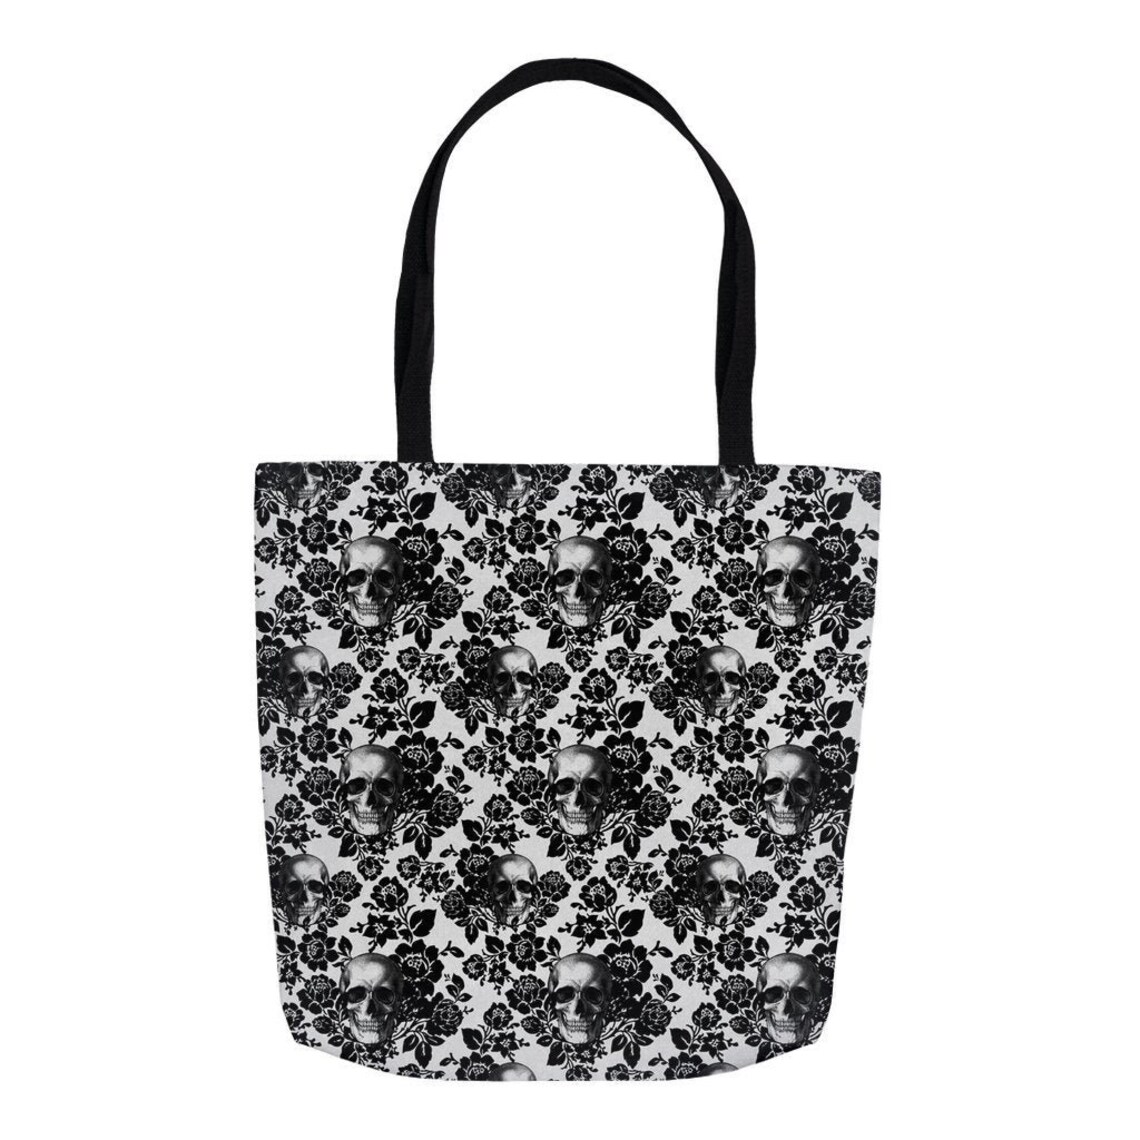 WDD Large Tote Bag 18x18 Inch Black Flowers and Skulls Print - Etsy